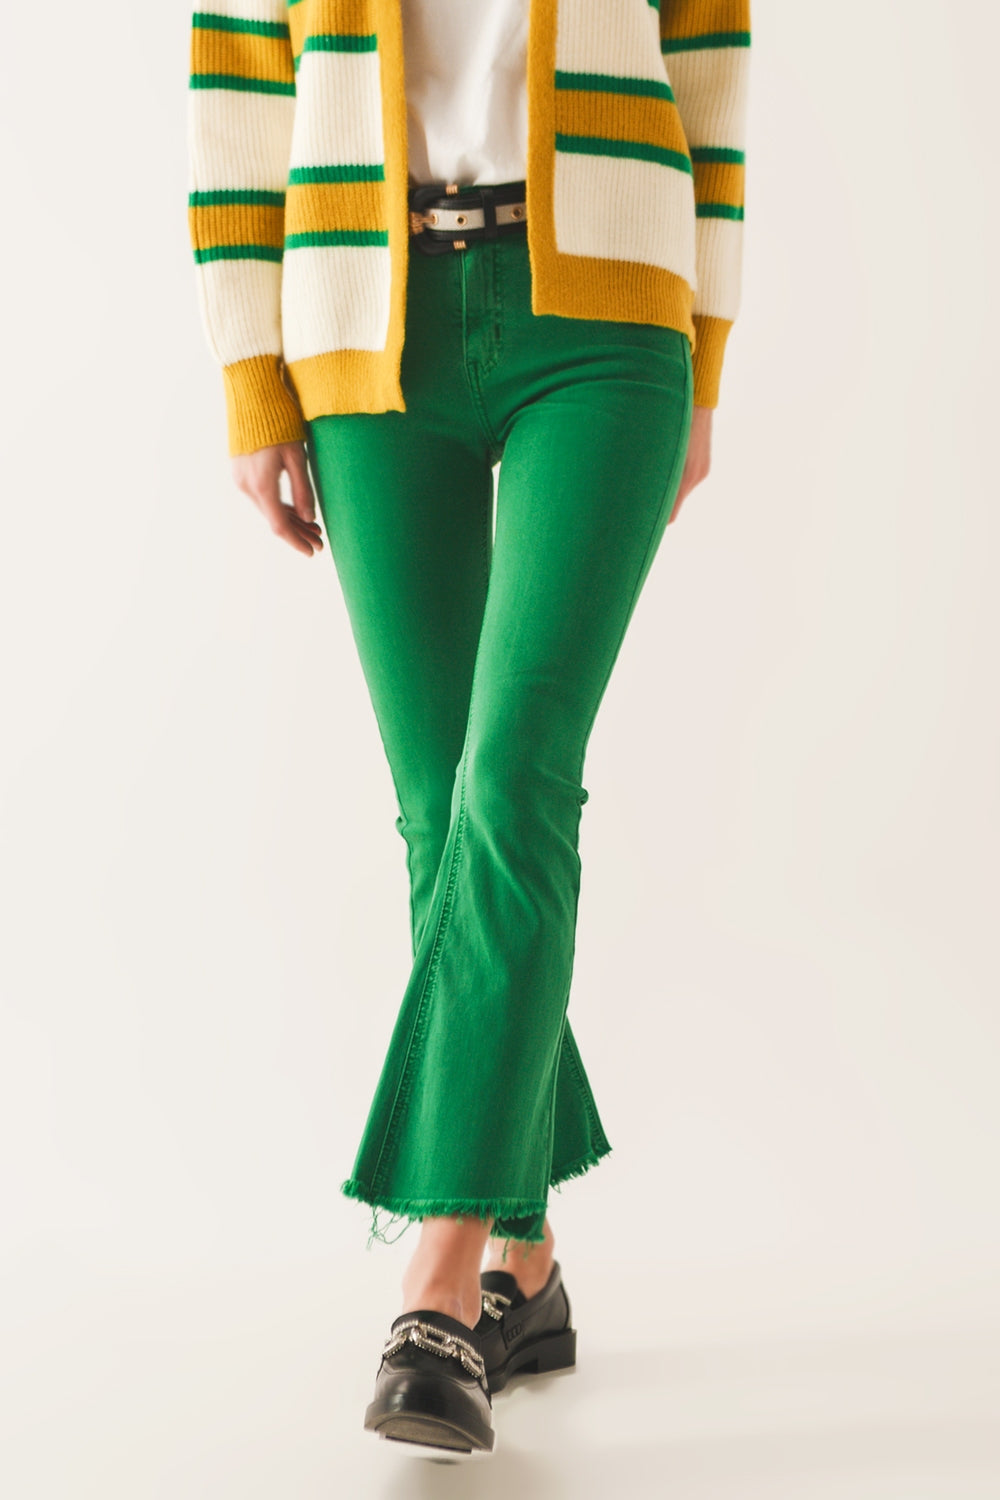 Q2 Flare jeans with raw hem edge in bright green